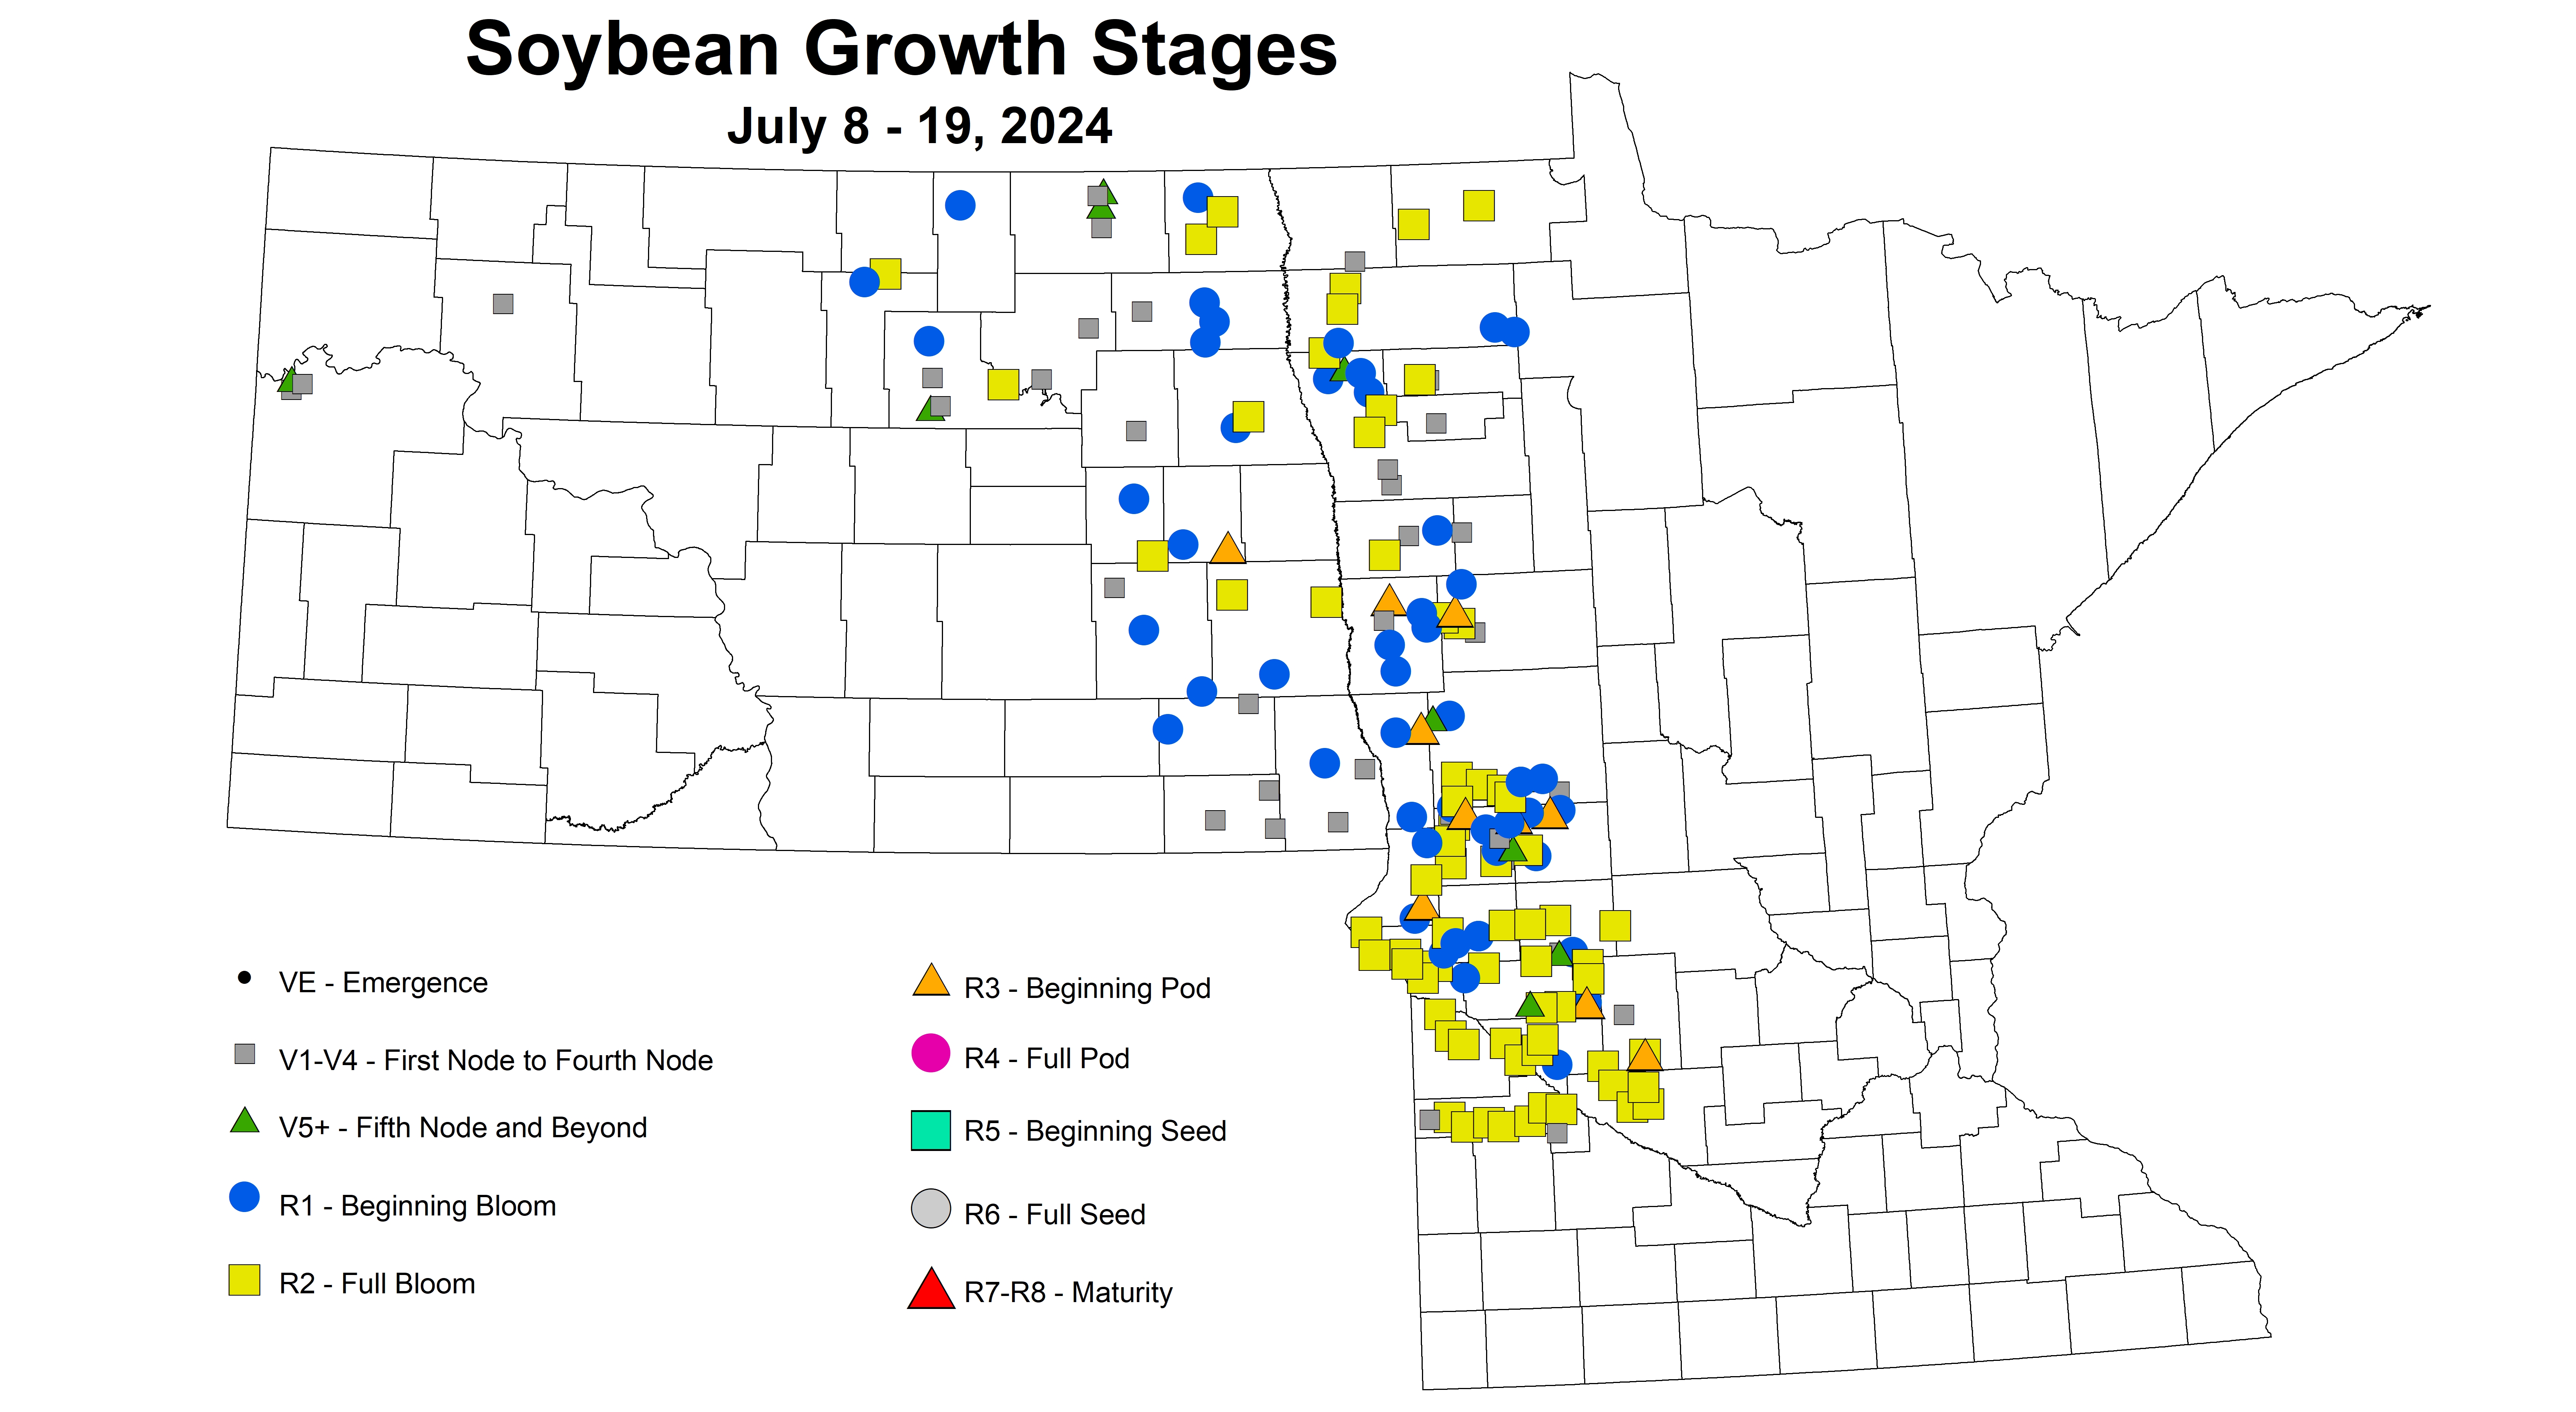 soybean growth stages July 8-19 2024